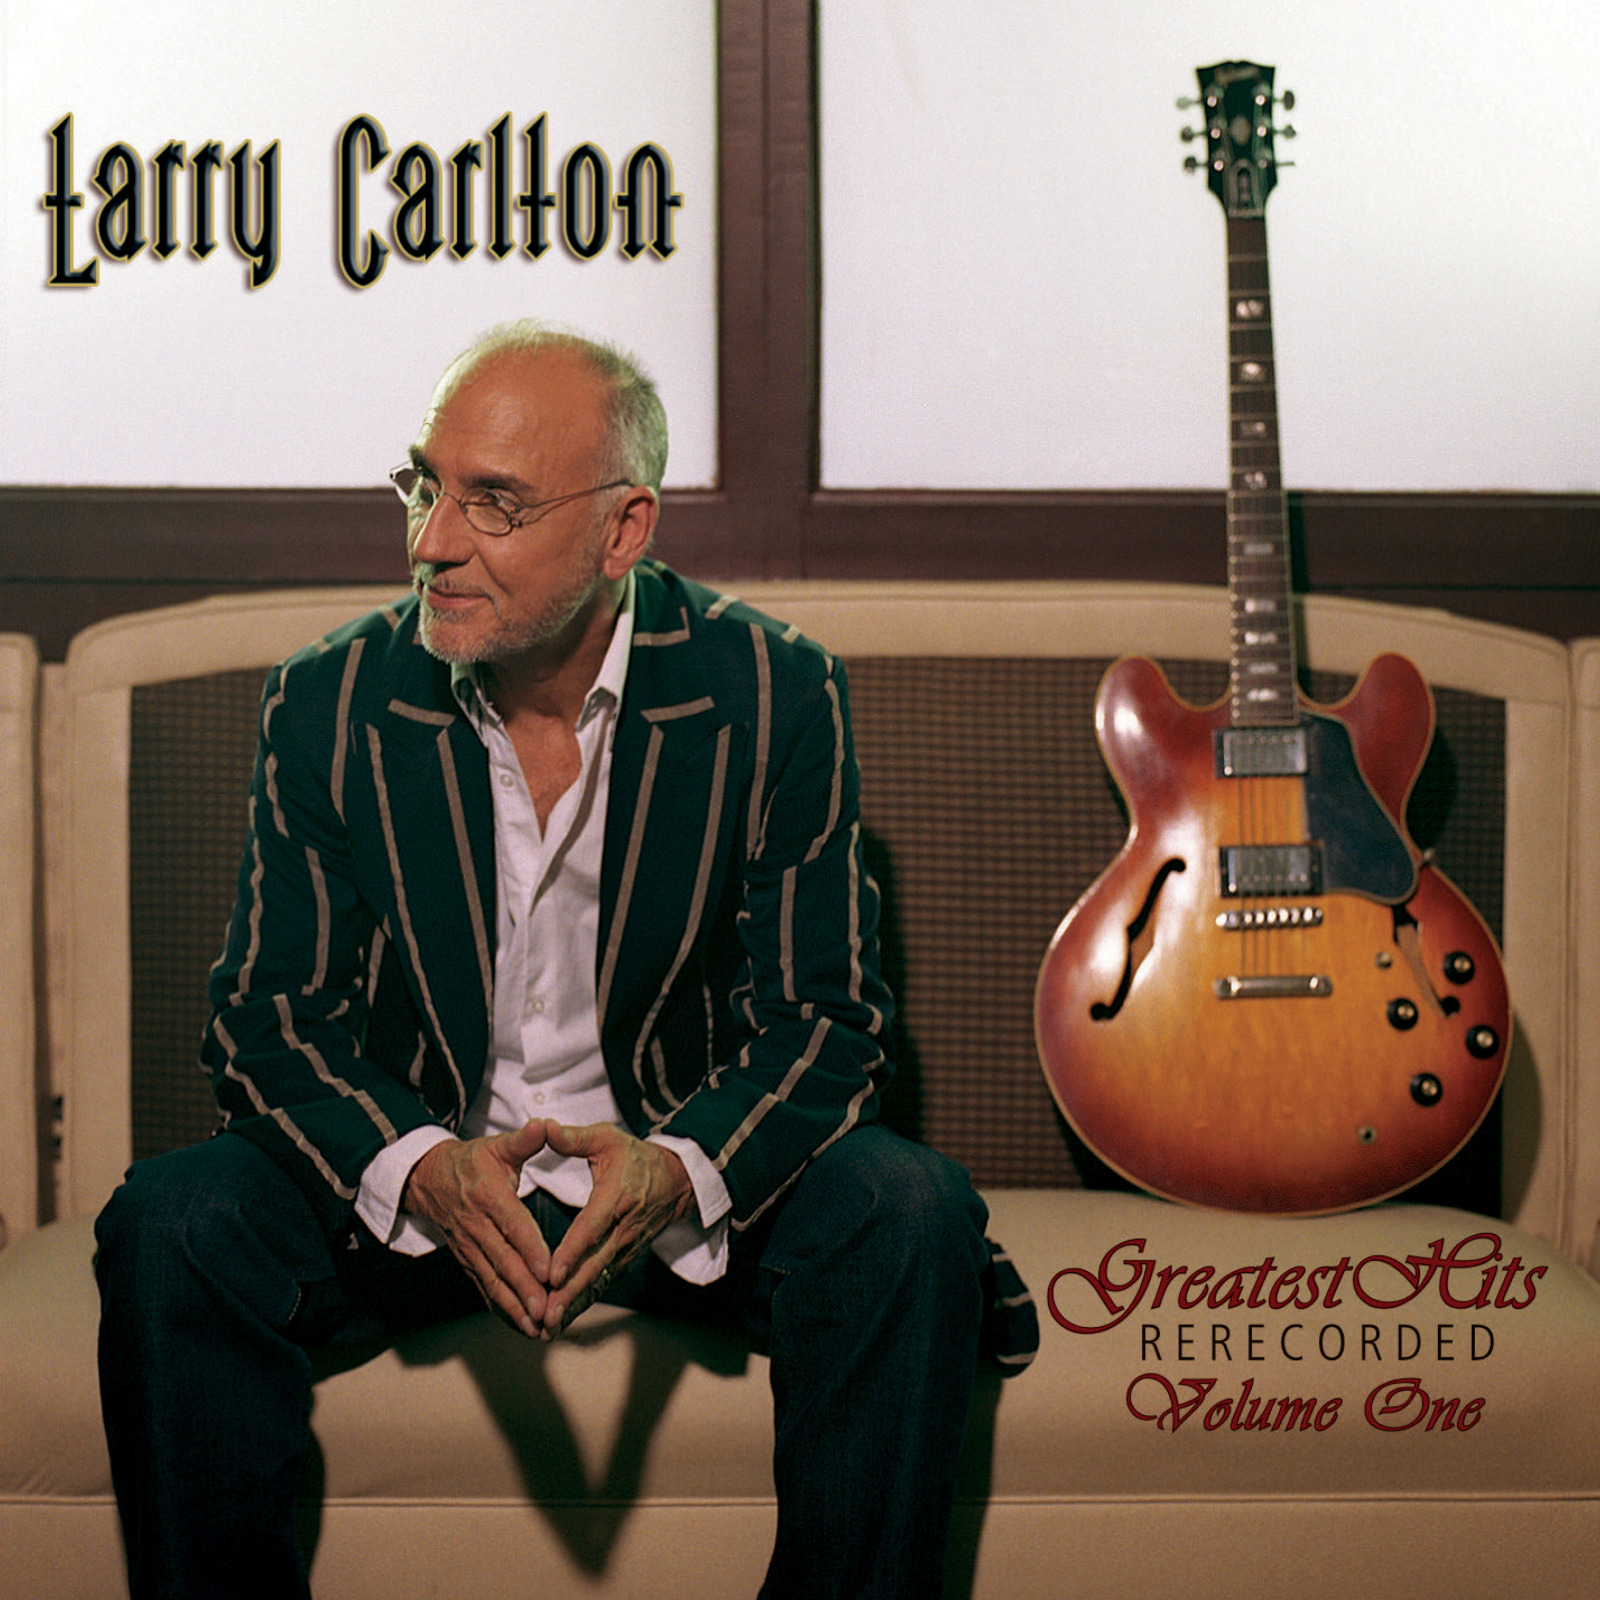 LARRY CARLTON - Greatest Hits  Rerecorded Volume One cover 